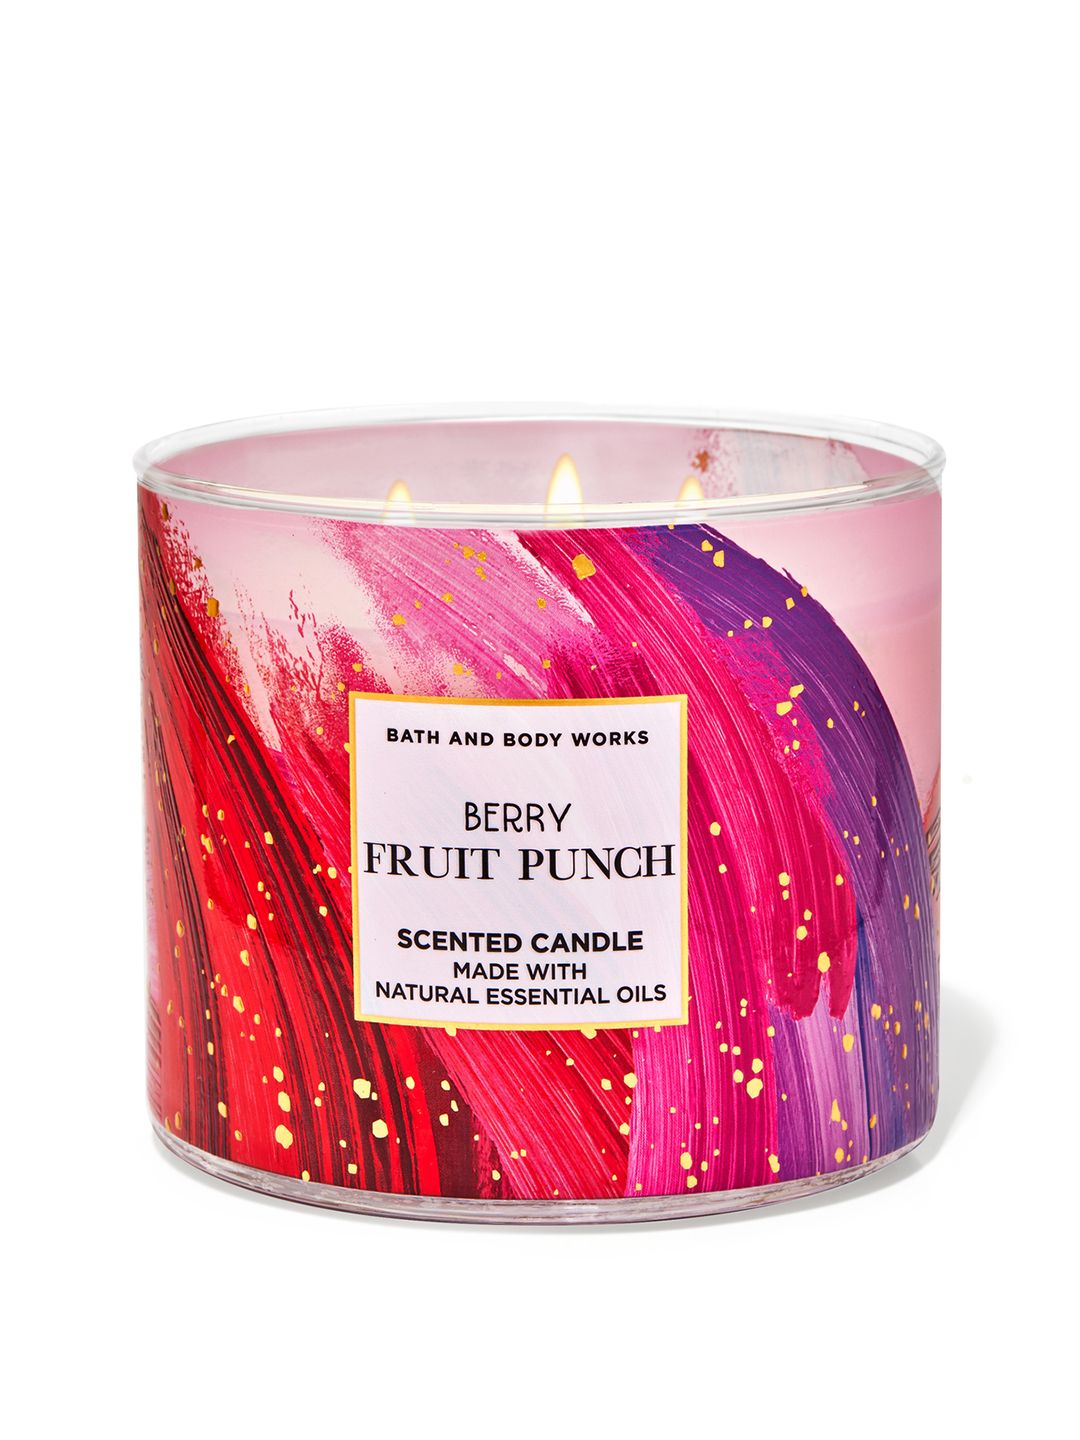 Bath & Body Works Berry Fruit Punch 3-Wick Scented Candle with Essential Oils - 411g Price in India